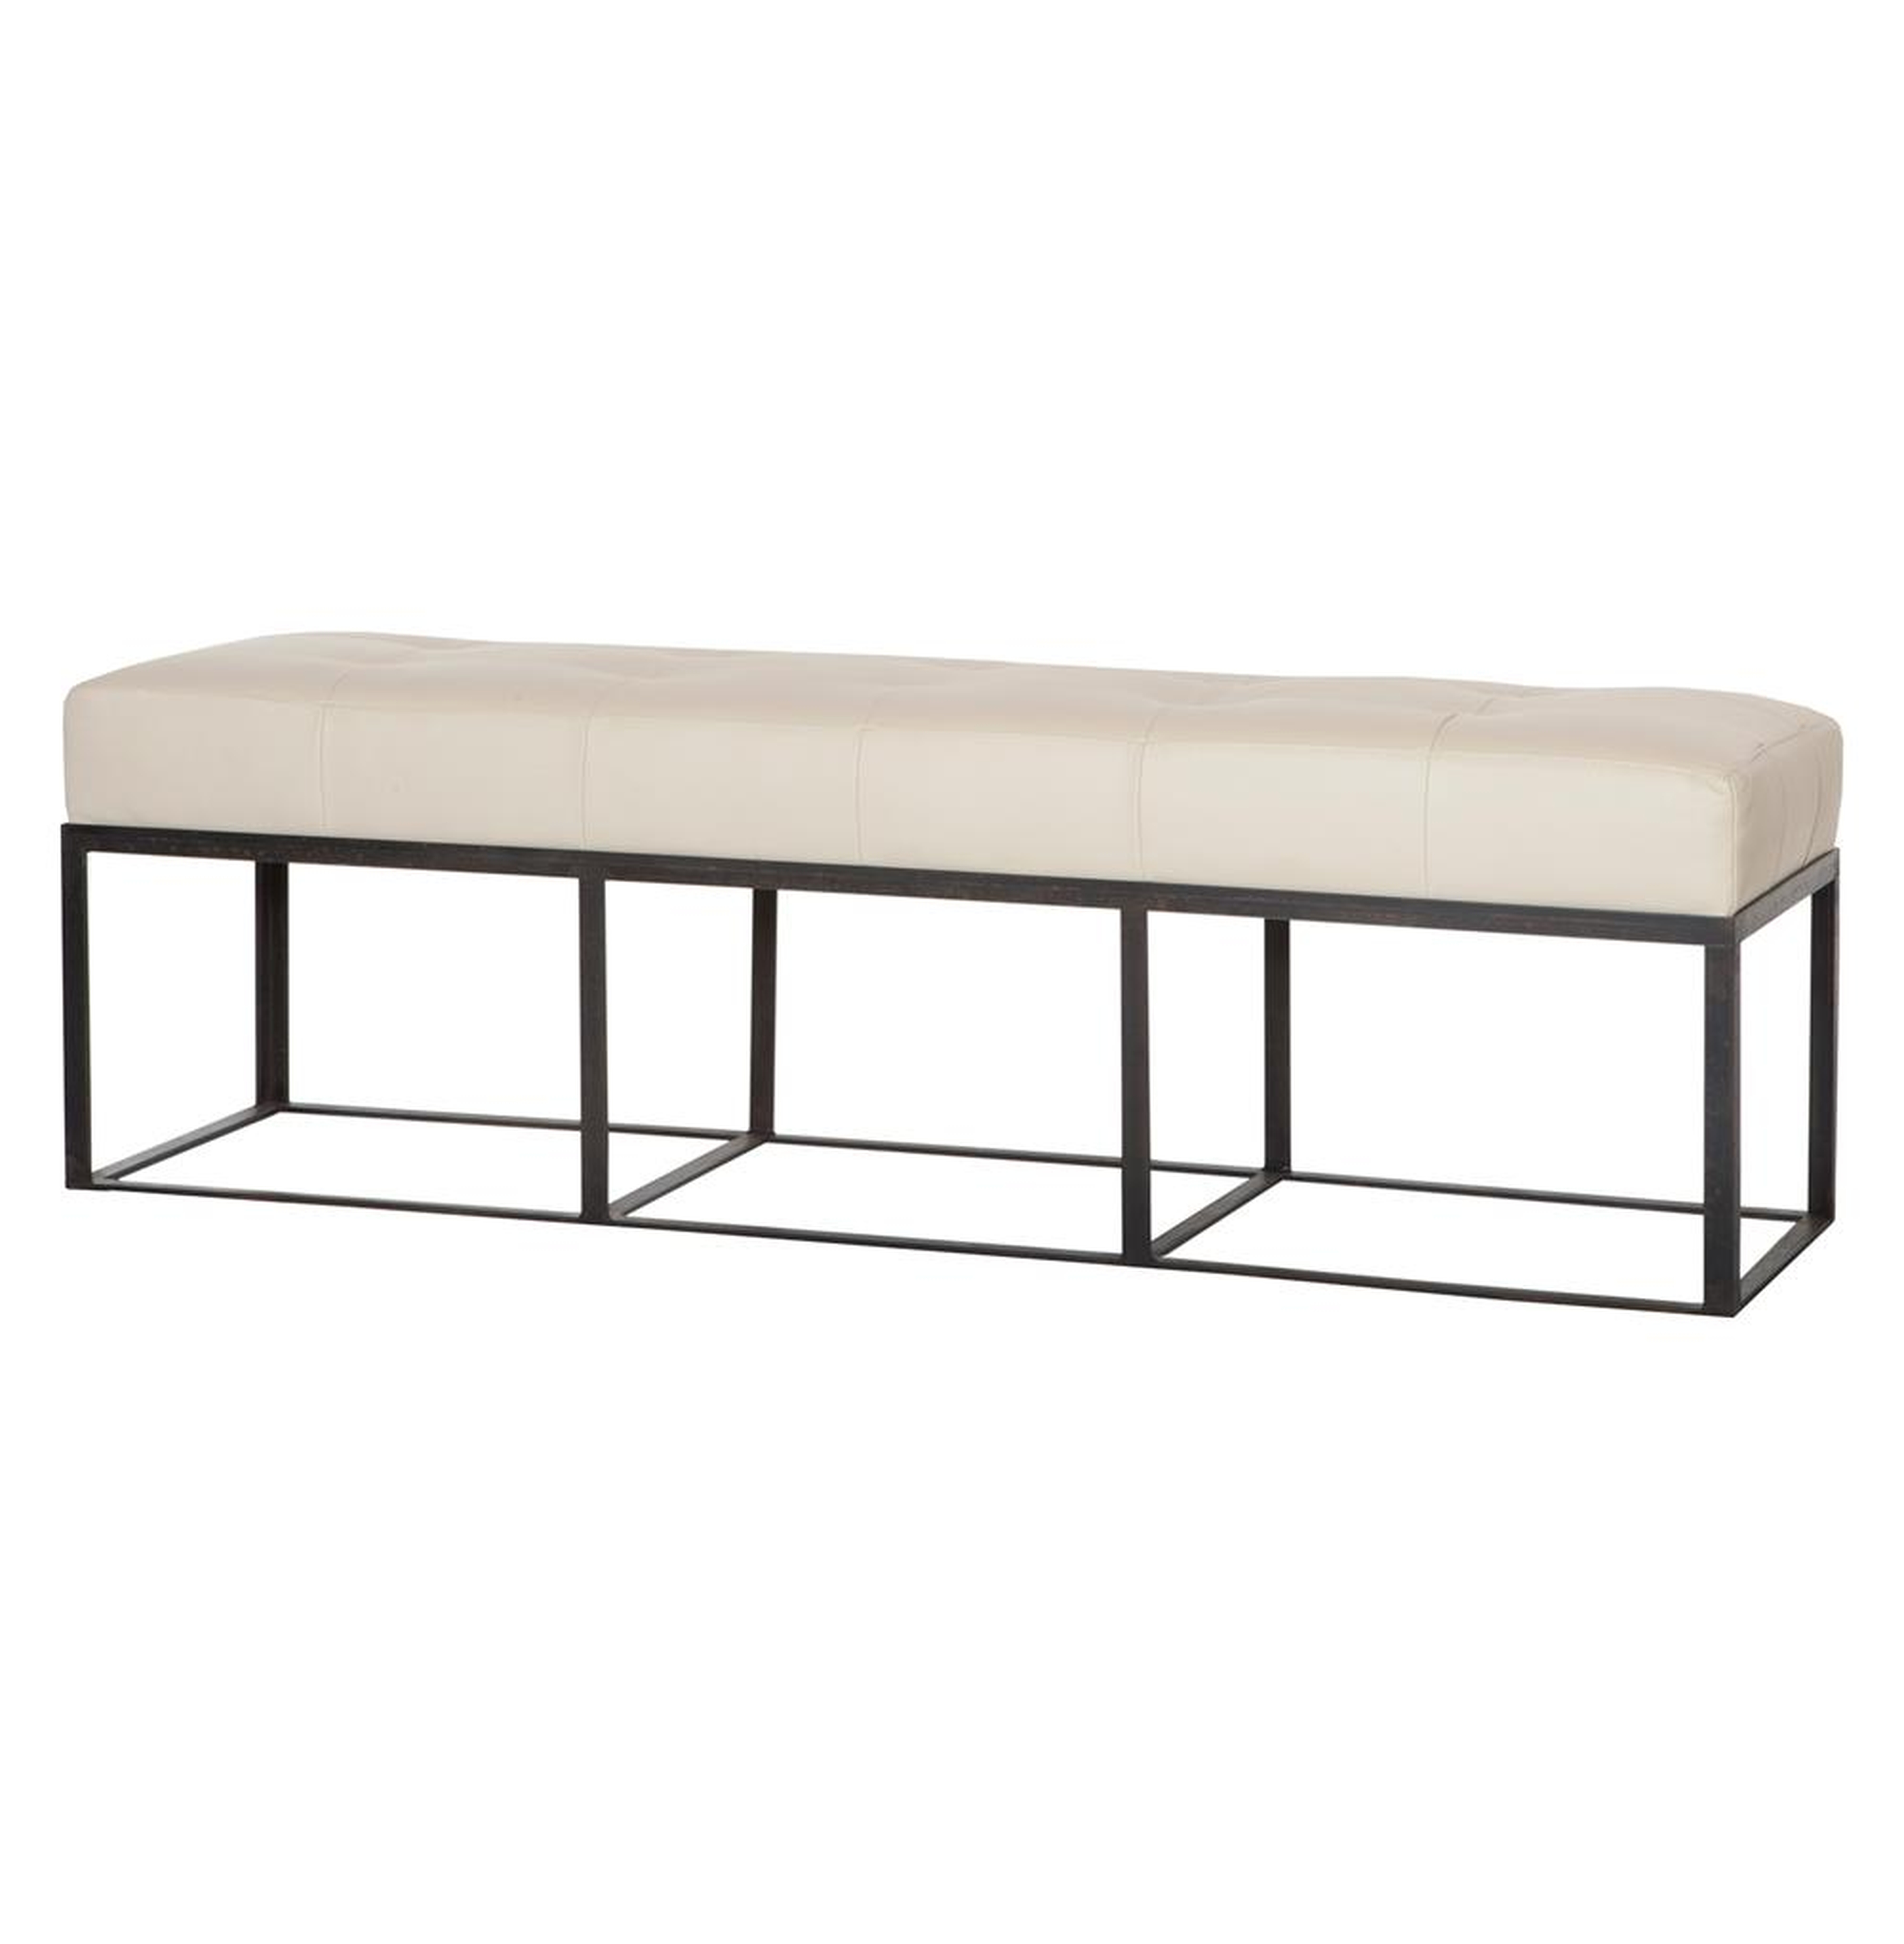 Cruz Modern Classic Ivory Leather 60 Inch Bench - Kathy Kuo Home